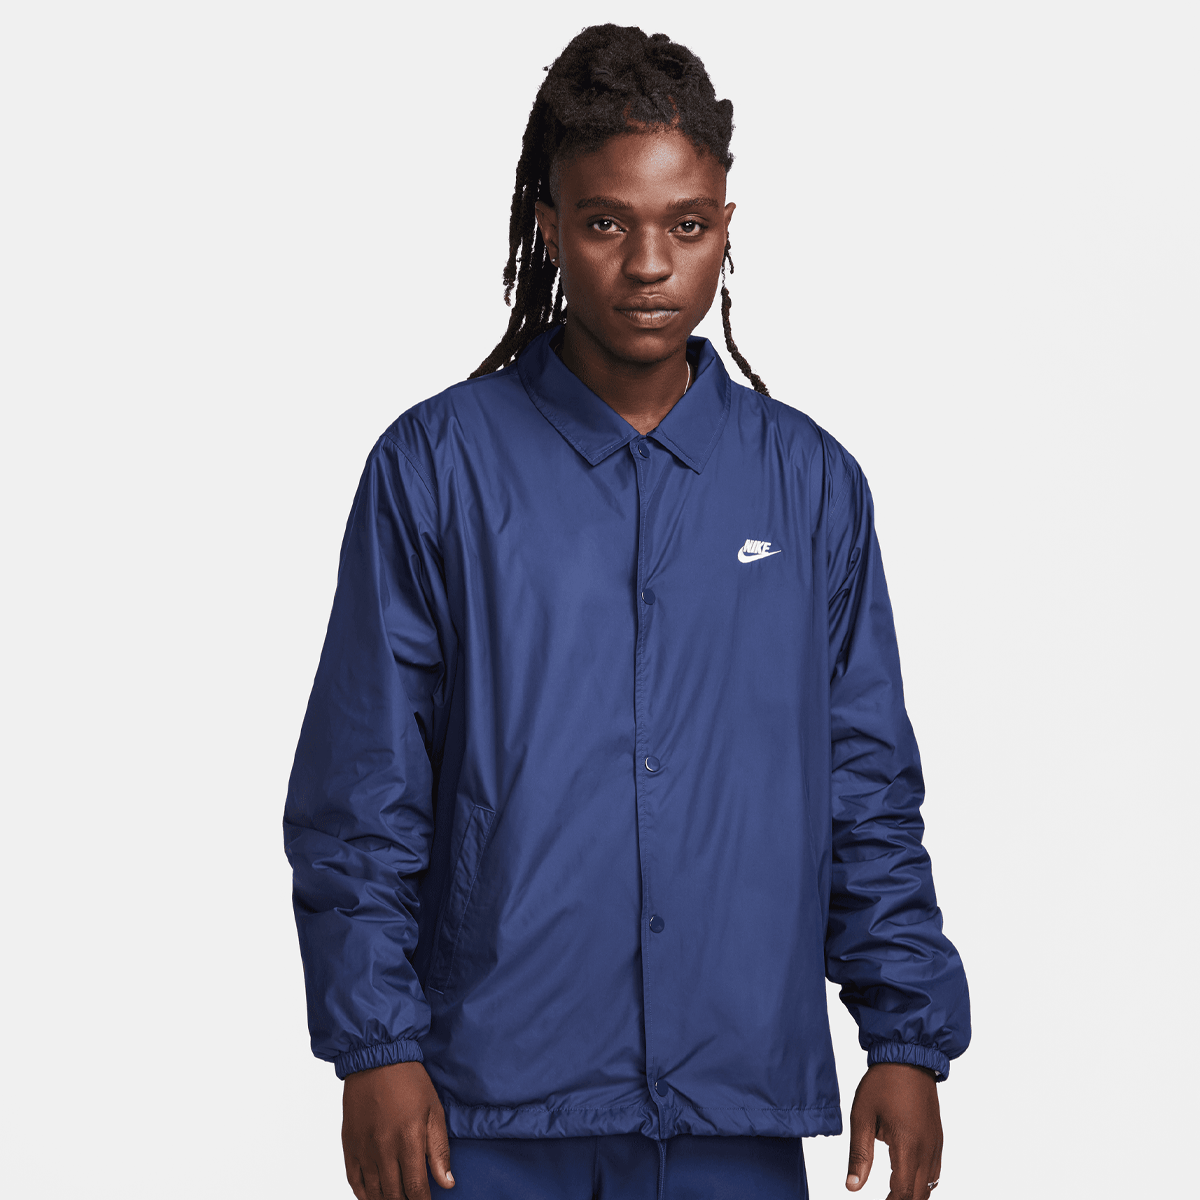 Club Coaches Jacket, NIKE, Apparel, midnight navy/white, taille: S